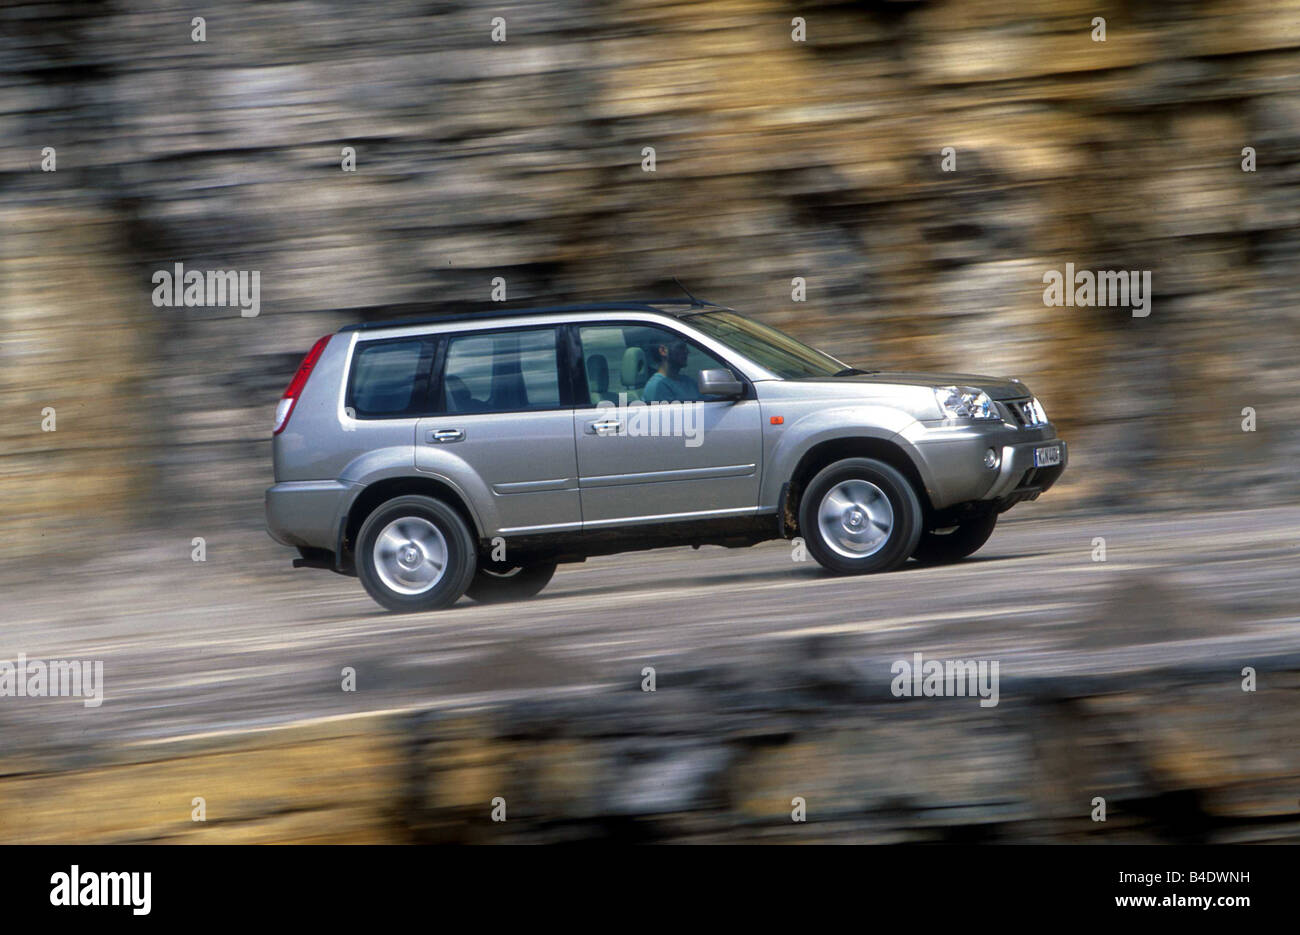 Car, Nissan X-Trail 2.0, cross country vehicle, silver, model year 2000-, side view, driving, offroad Stock Photo